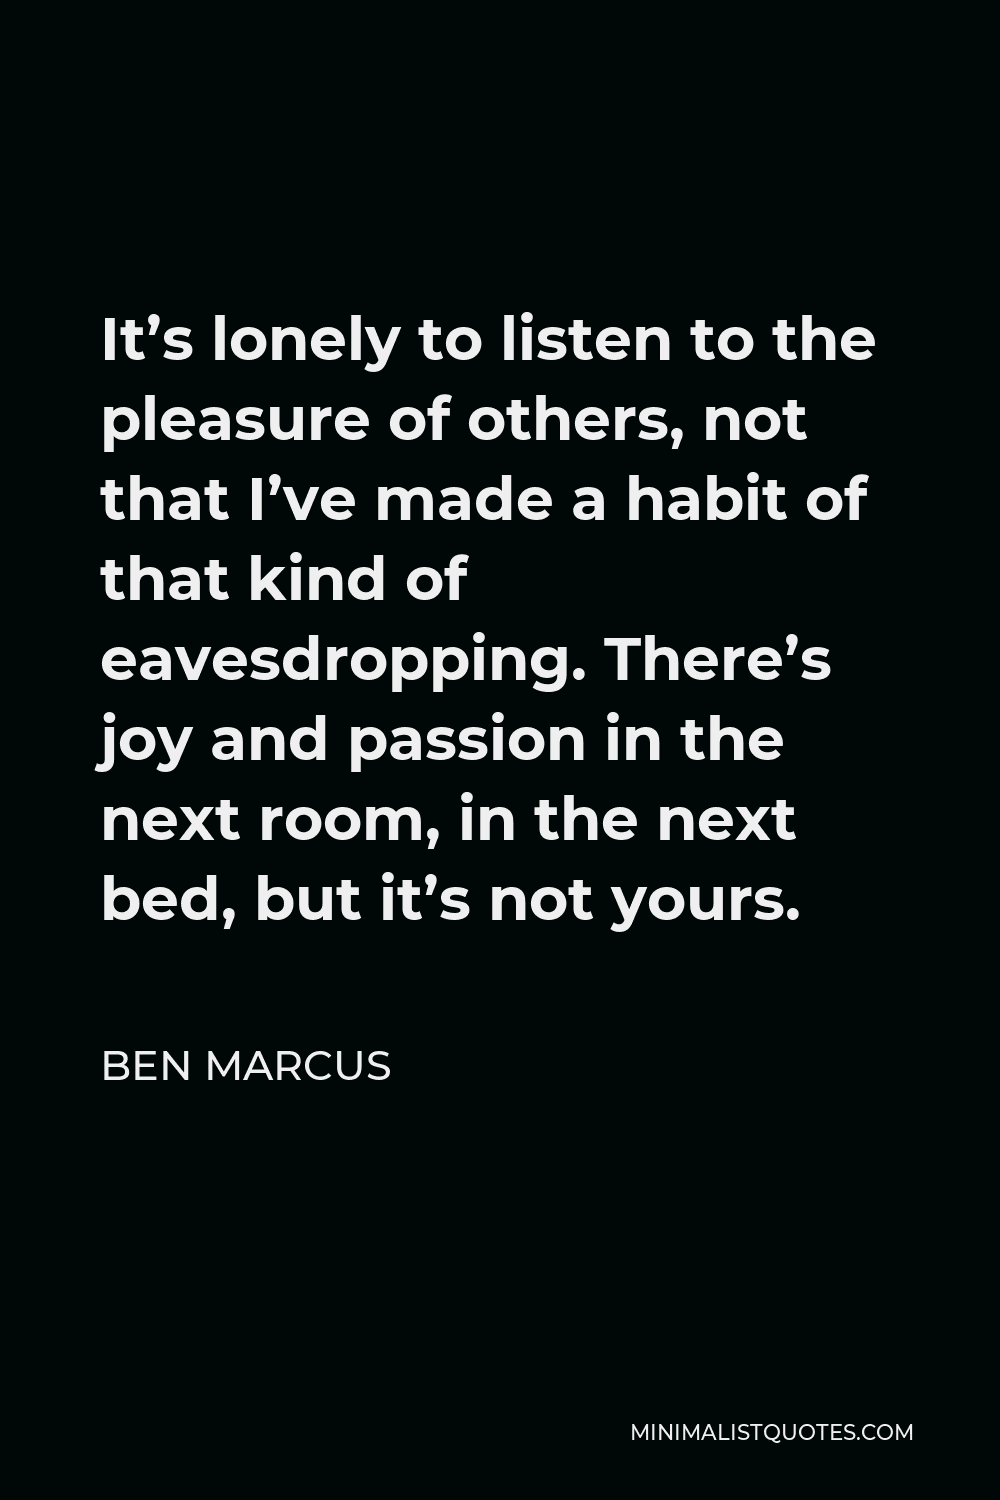 Ben Marcus Quote - It’s lonely to listen to the pleasure of others, not that I’ve made a habit of that kind of eavesdropping. There’s joy and passion in the next room, in the next bed, but it’s not yours.